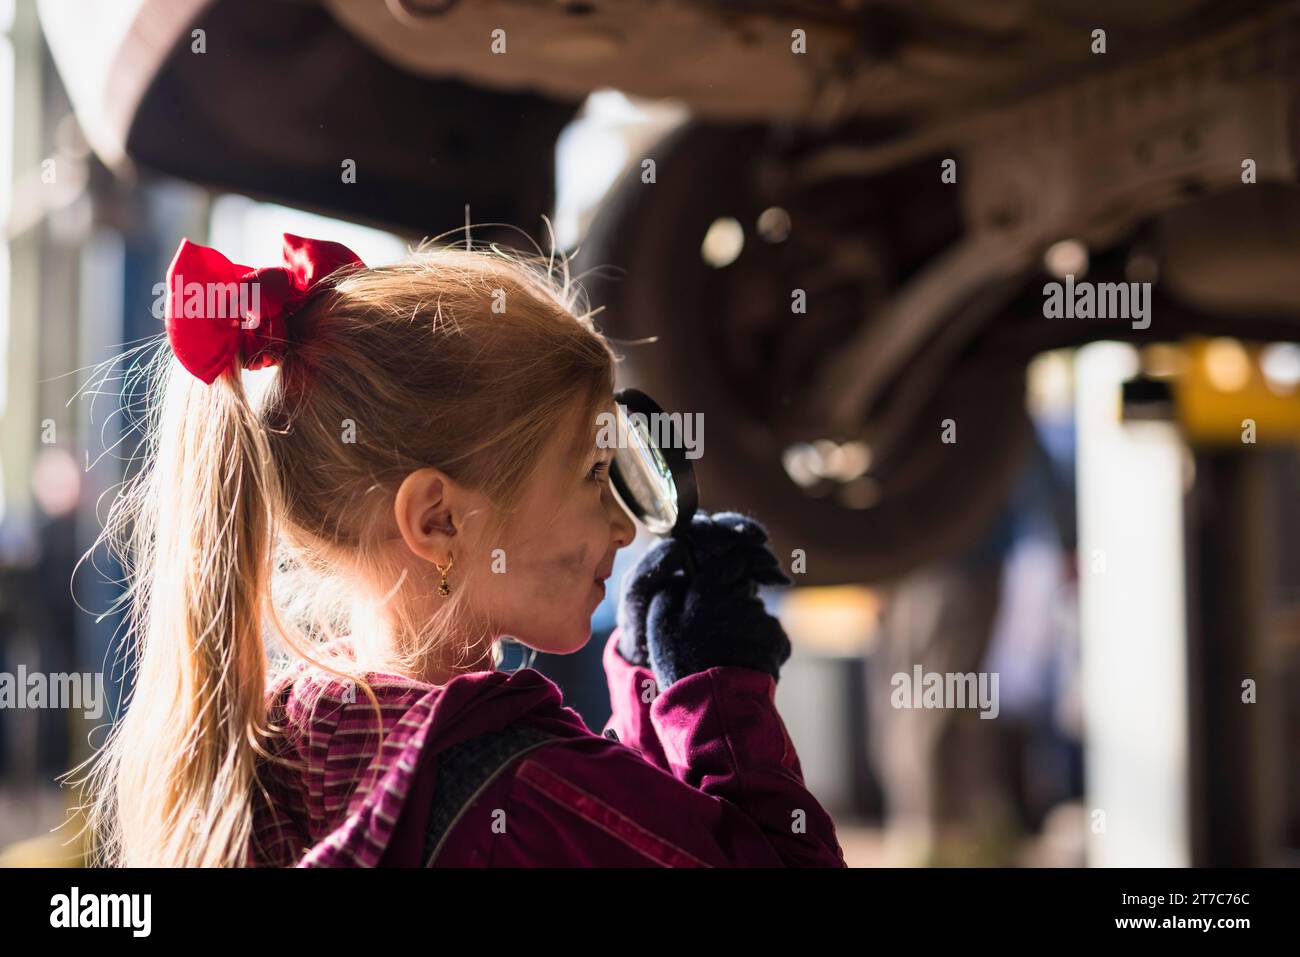 Little girl looking through magnifier Stock Photo